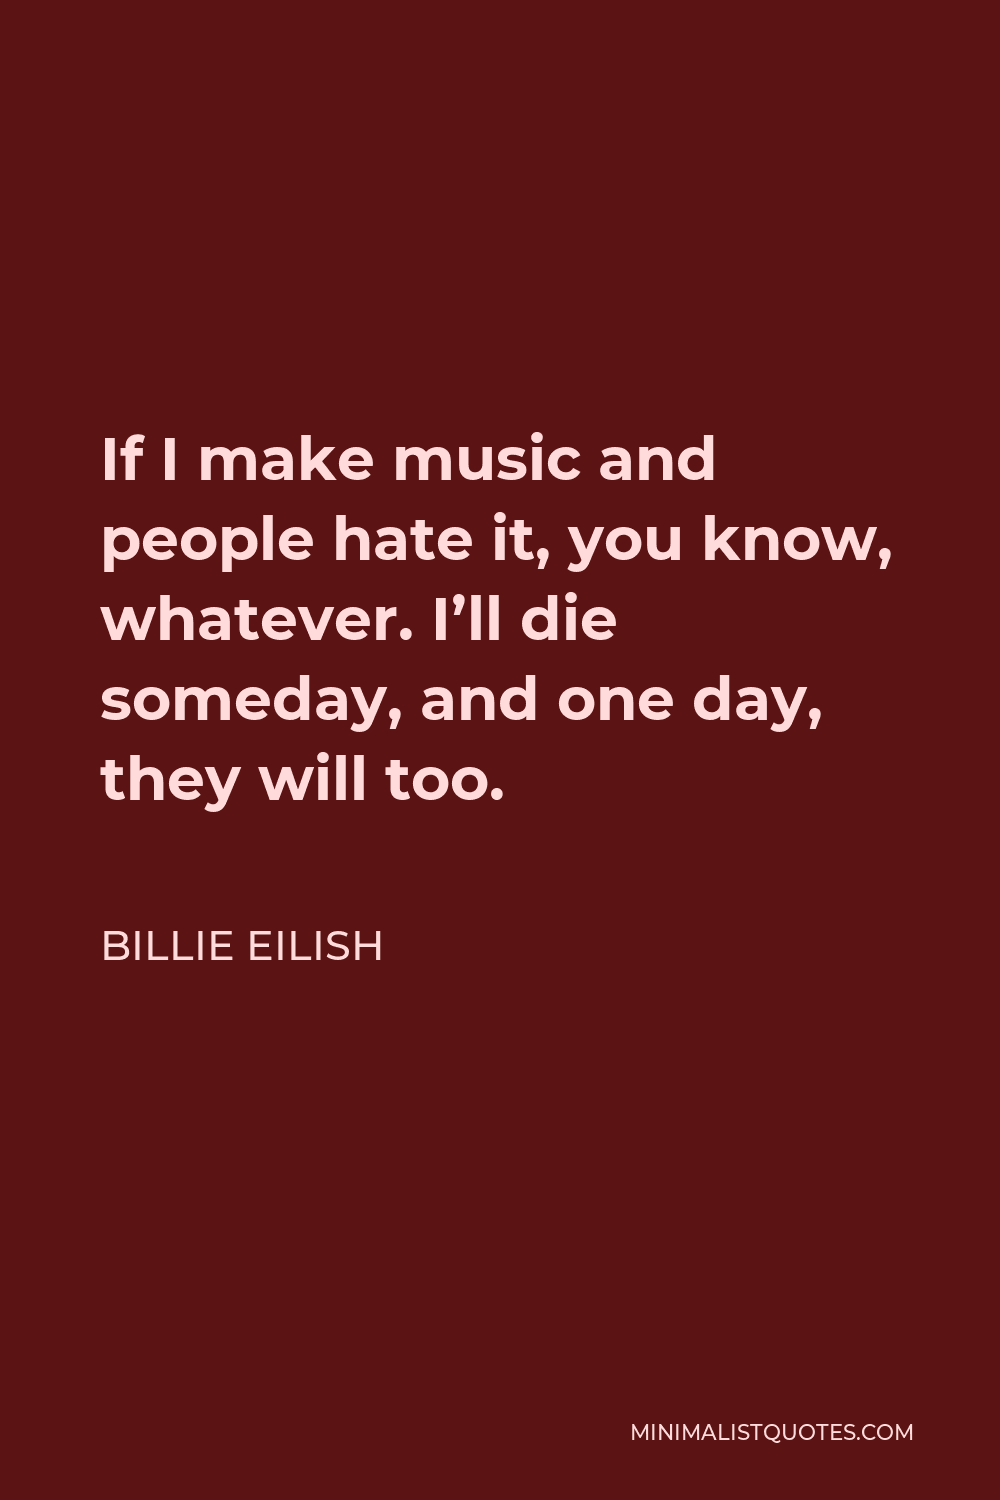 Billie Eilish Quote - If I make music and people hate it, you know, whatever. I’ll die someday, and one day, they will too.